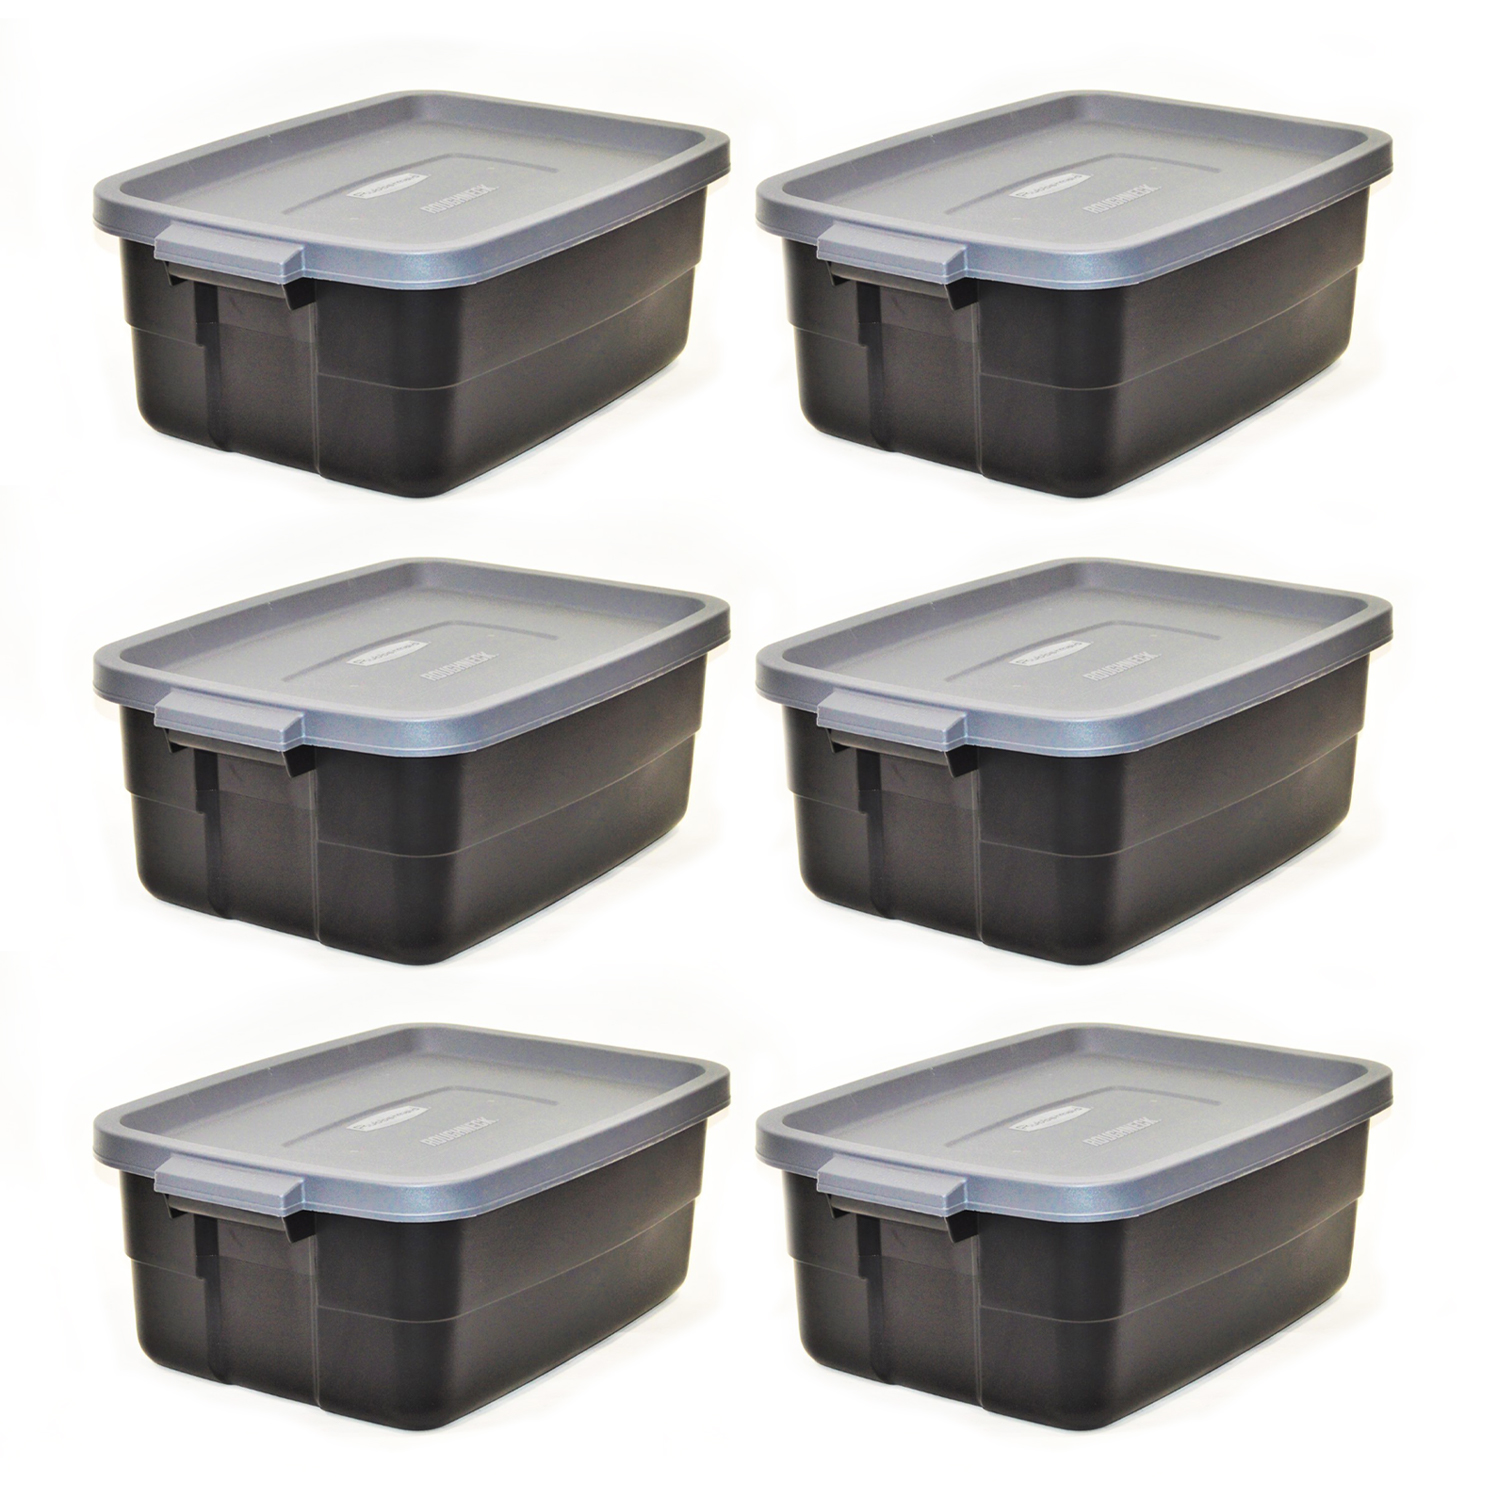 Rubbermaid Roughneck Tote 10 Gal Storage Container, Black/Gray (6 Pack) - image 1 of 7